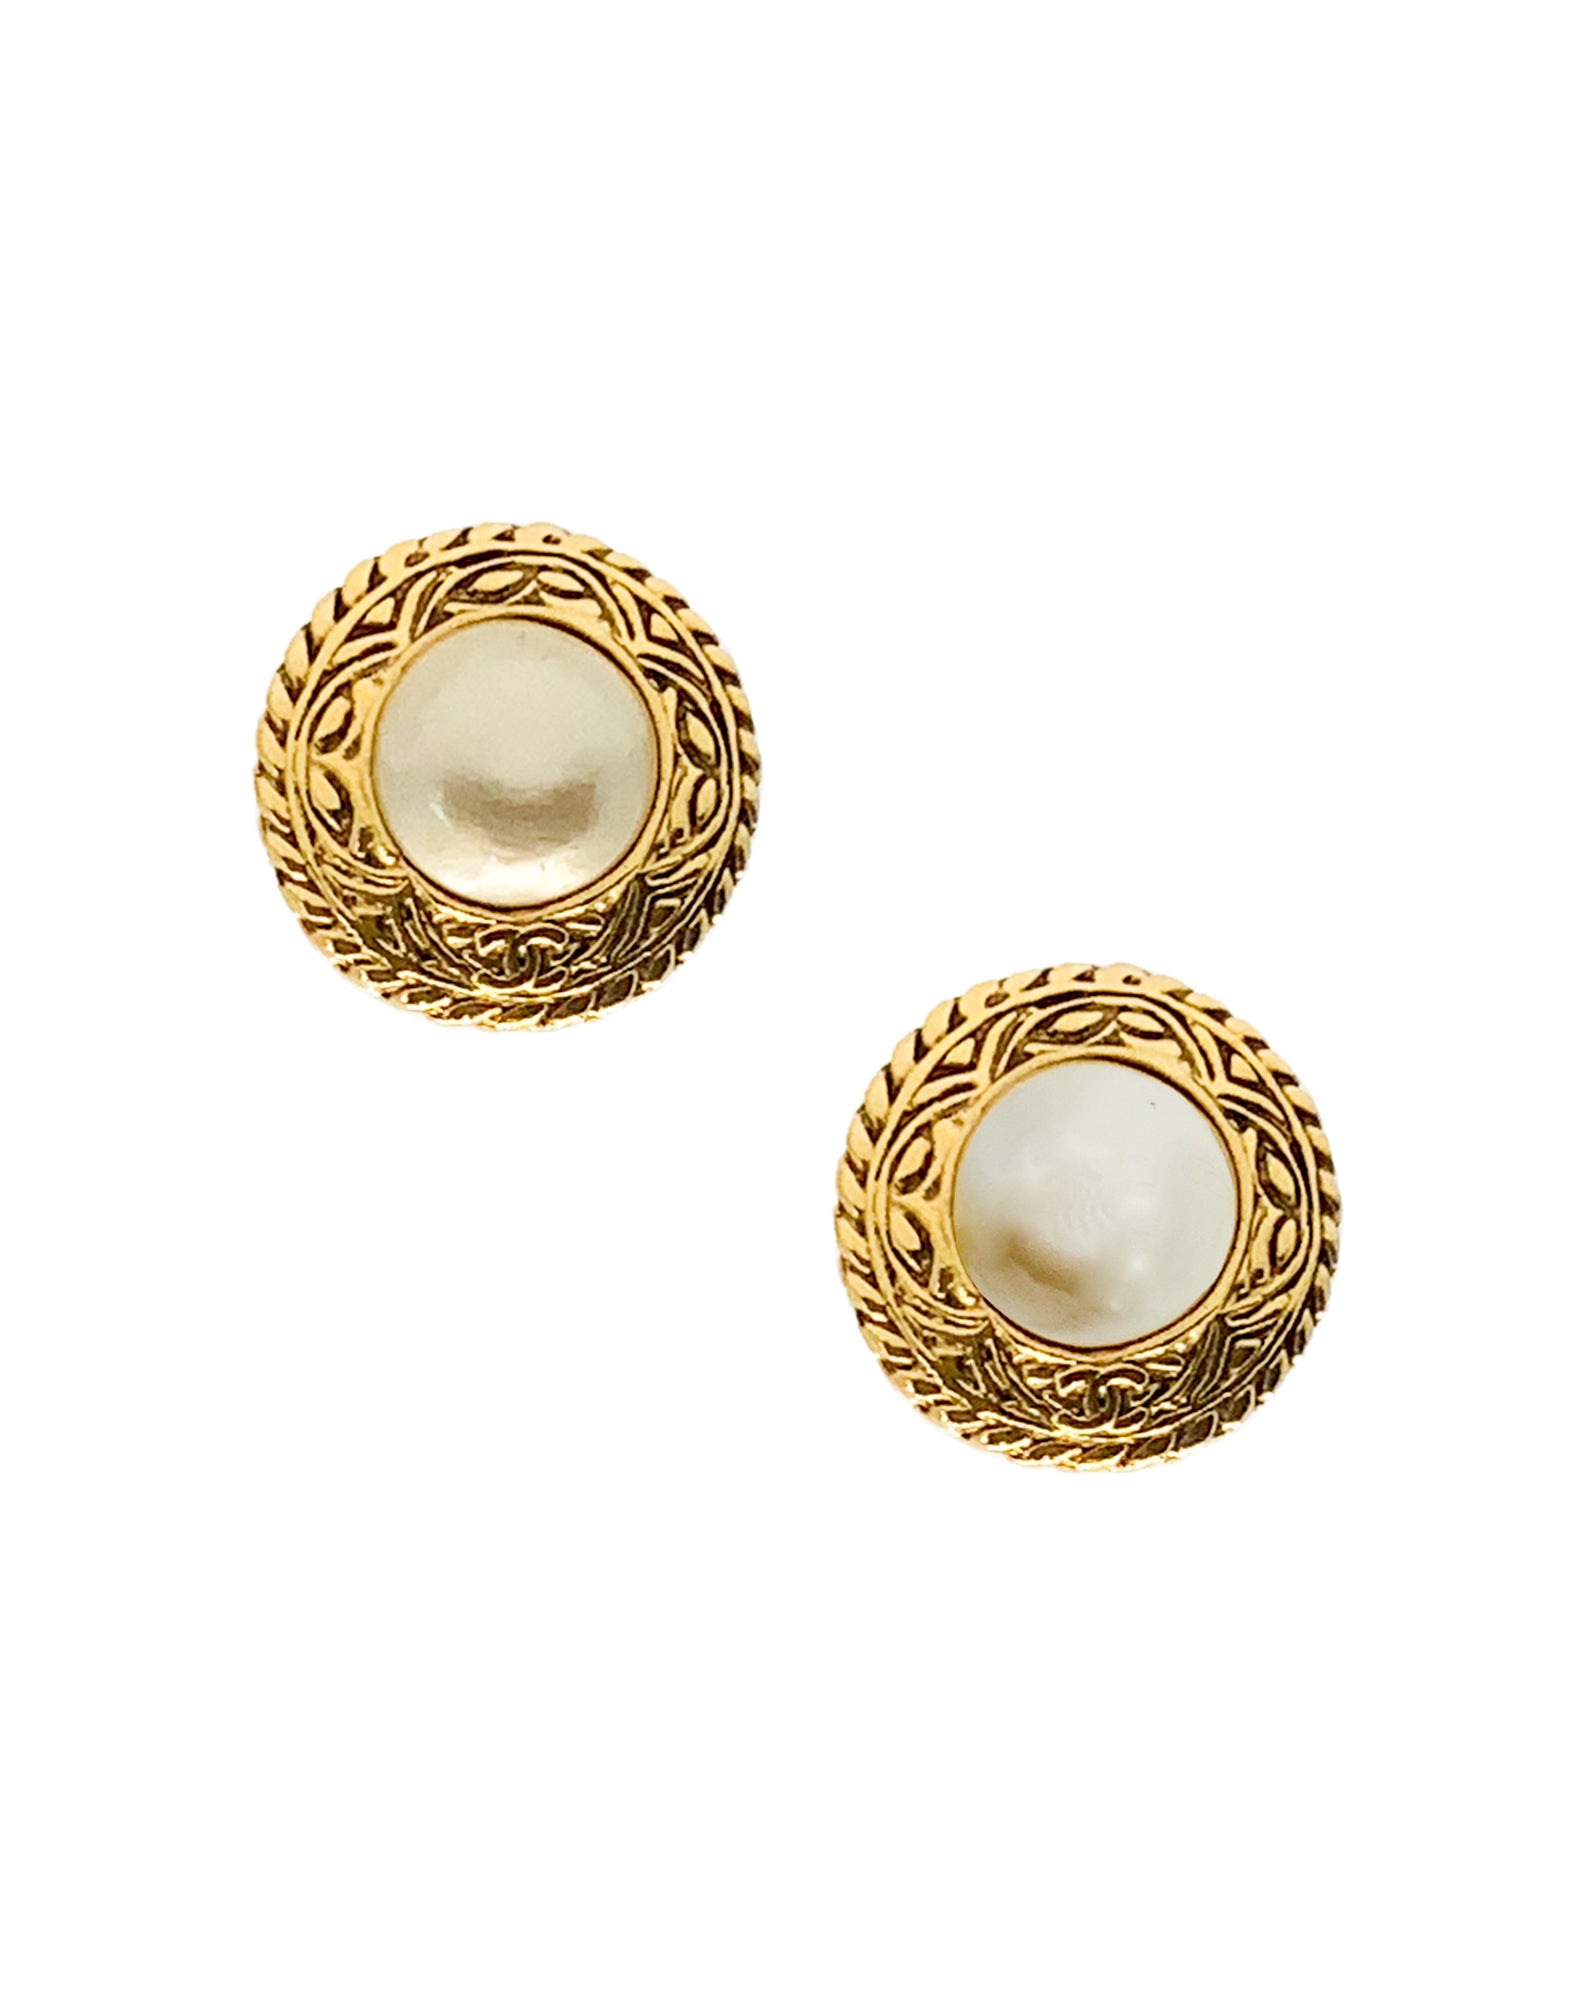 Vintage Chanel Diamante Clip Back Earrings Pearls Costume Gold